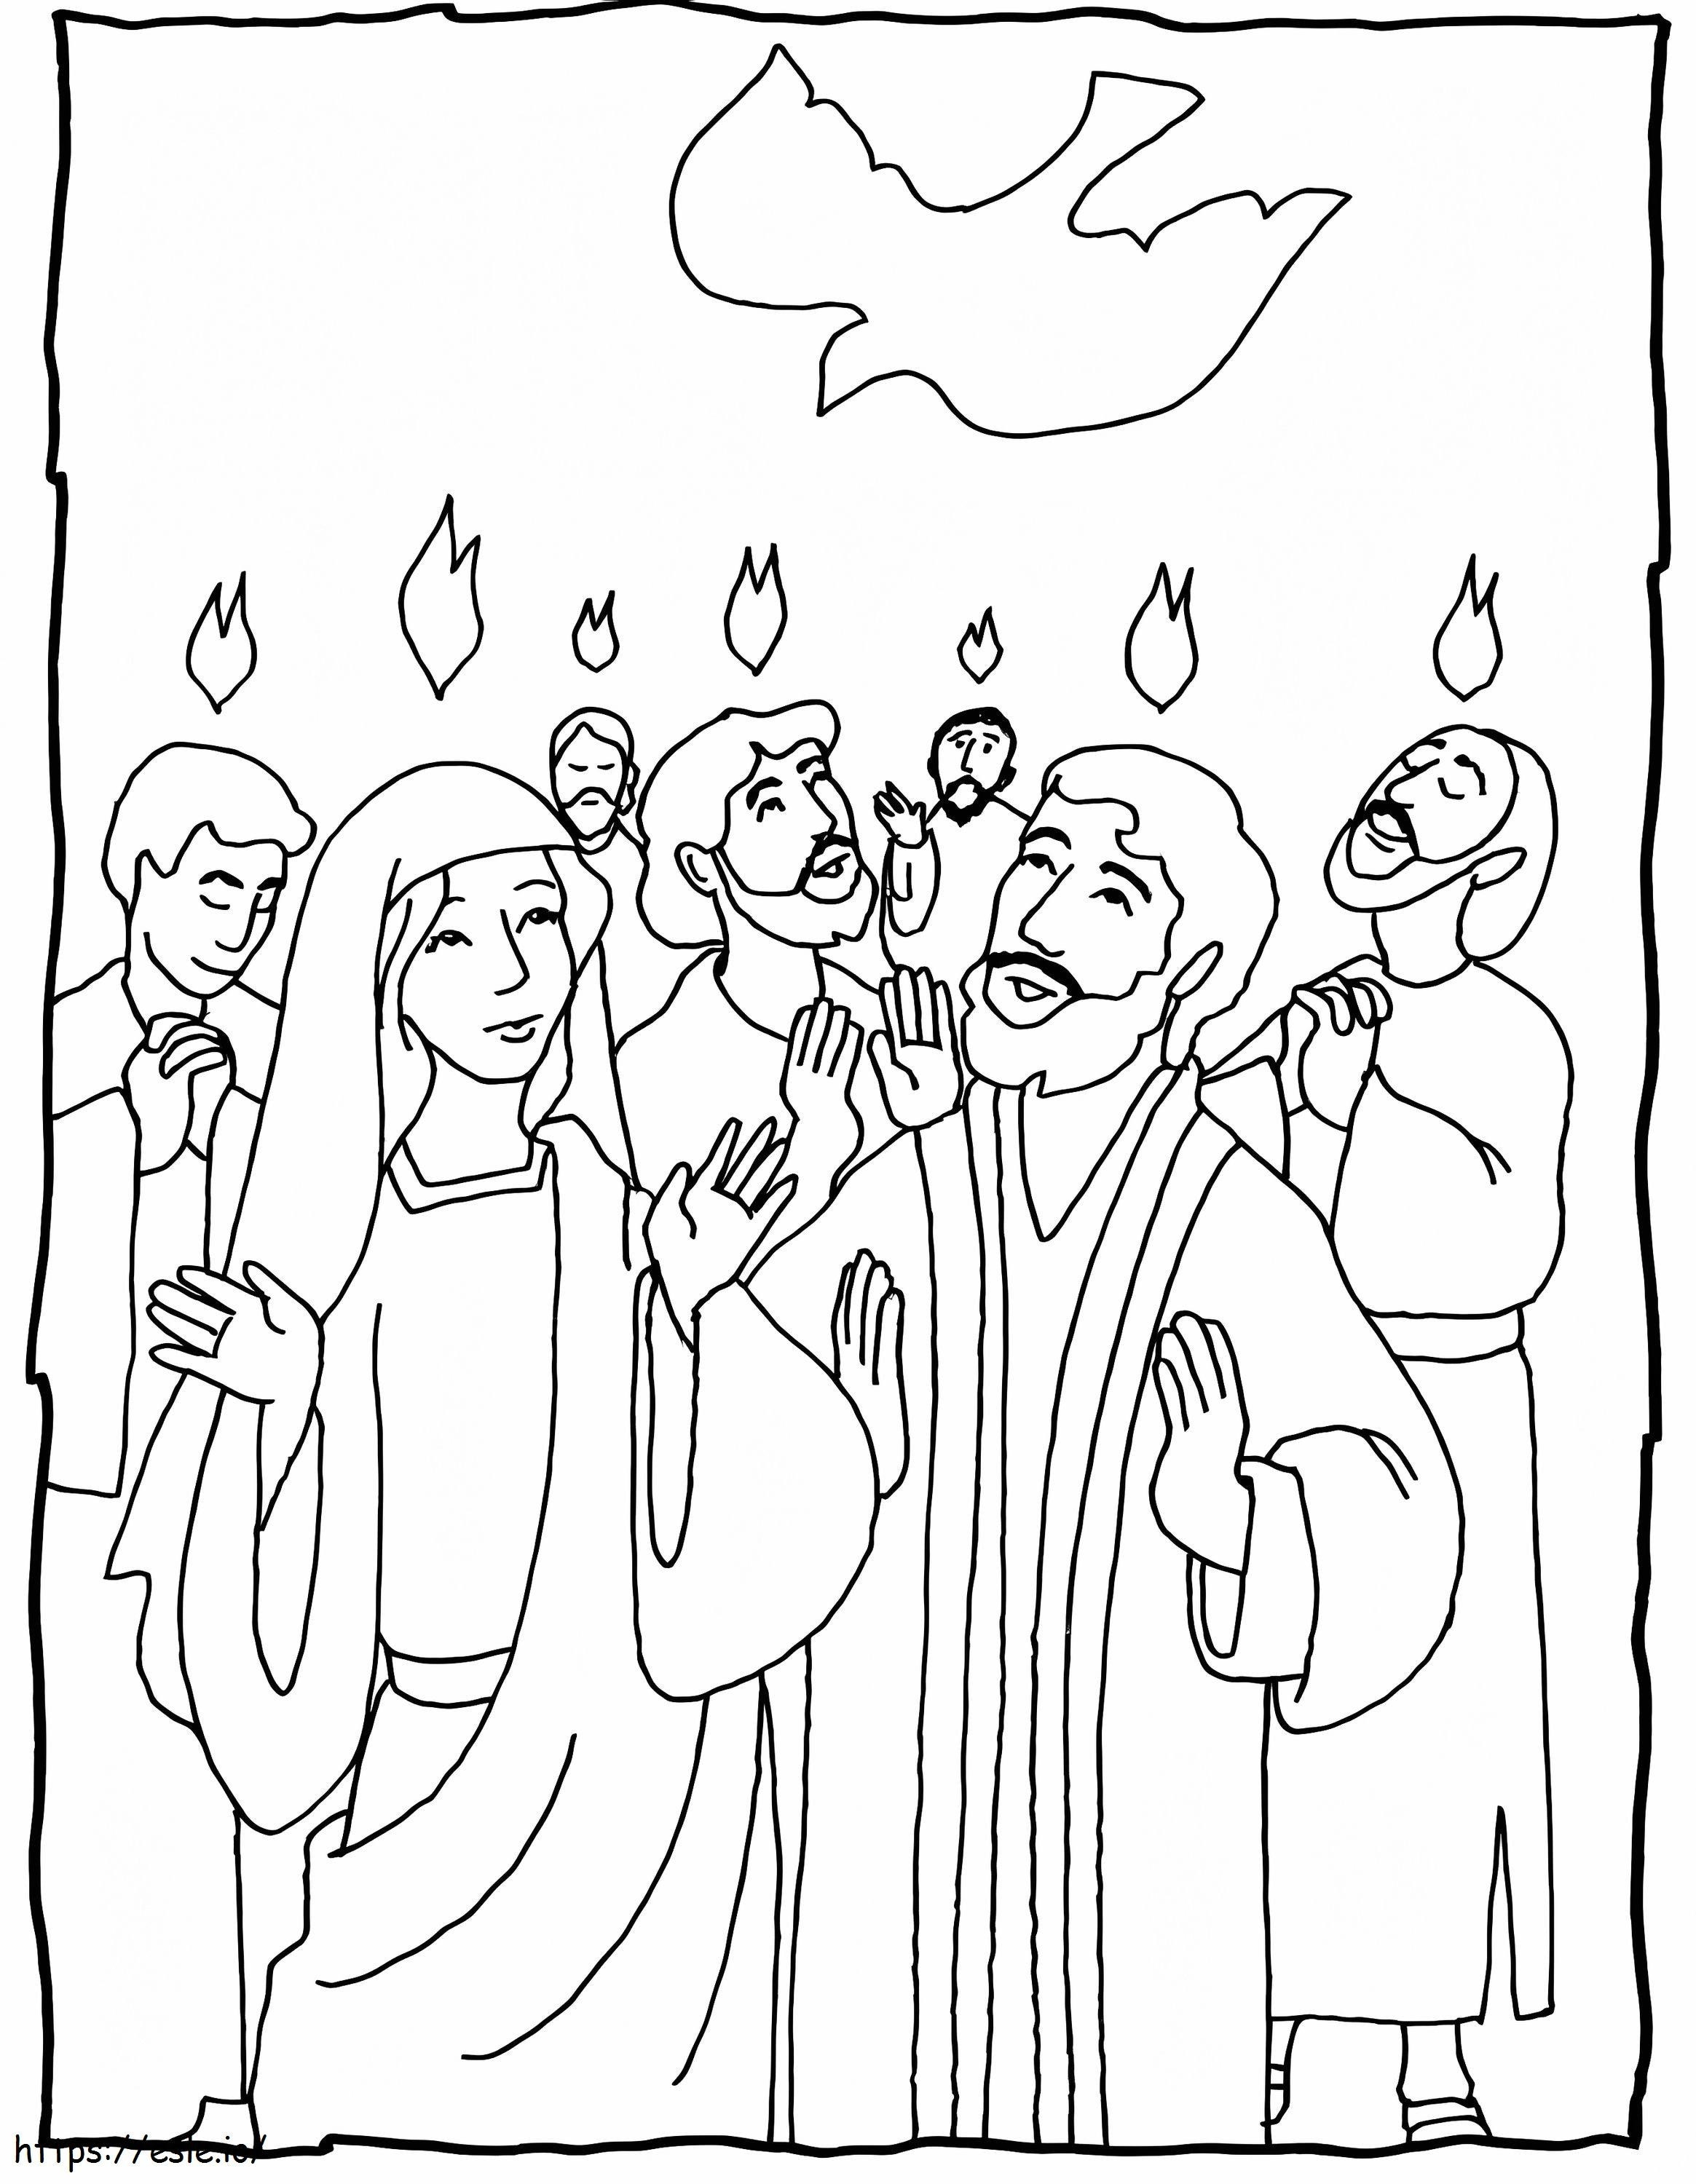 Pentecost 2 coloring page